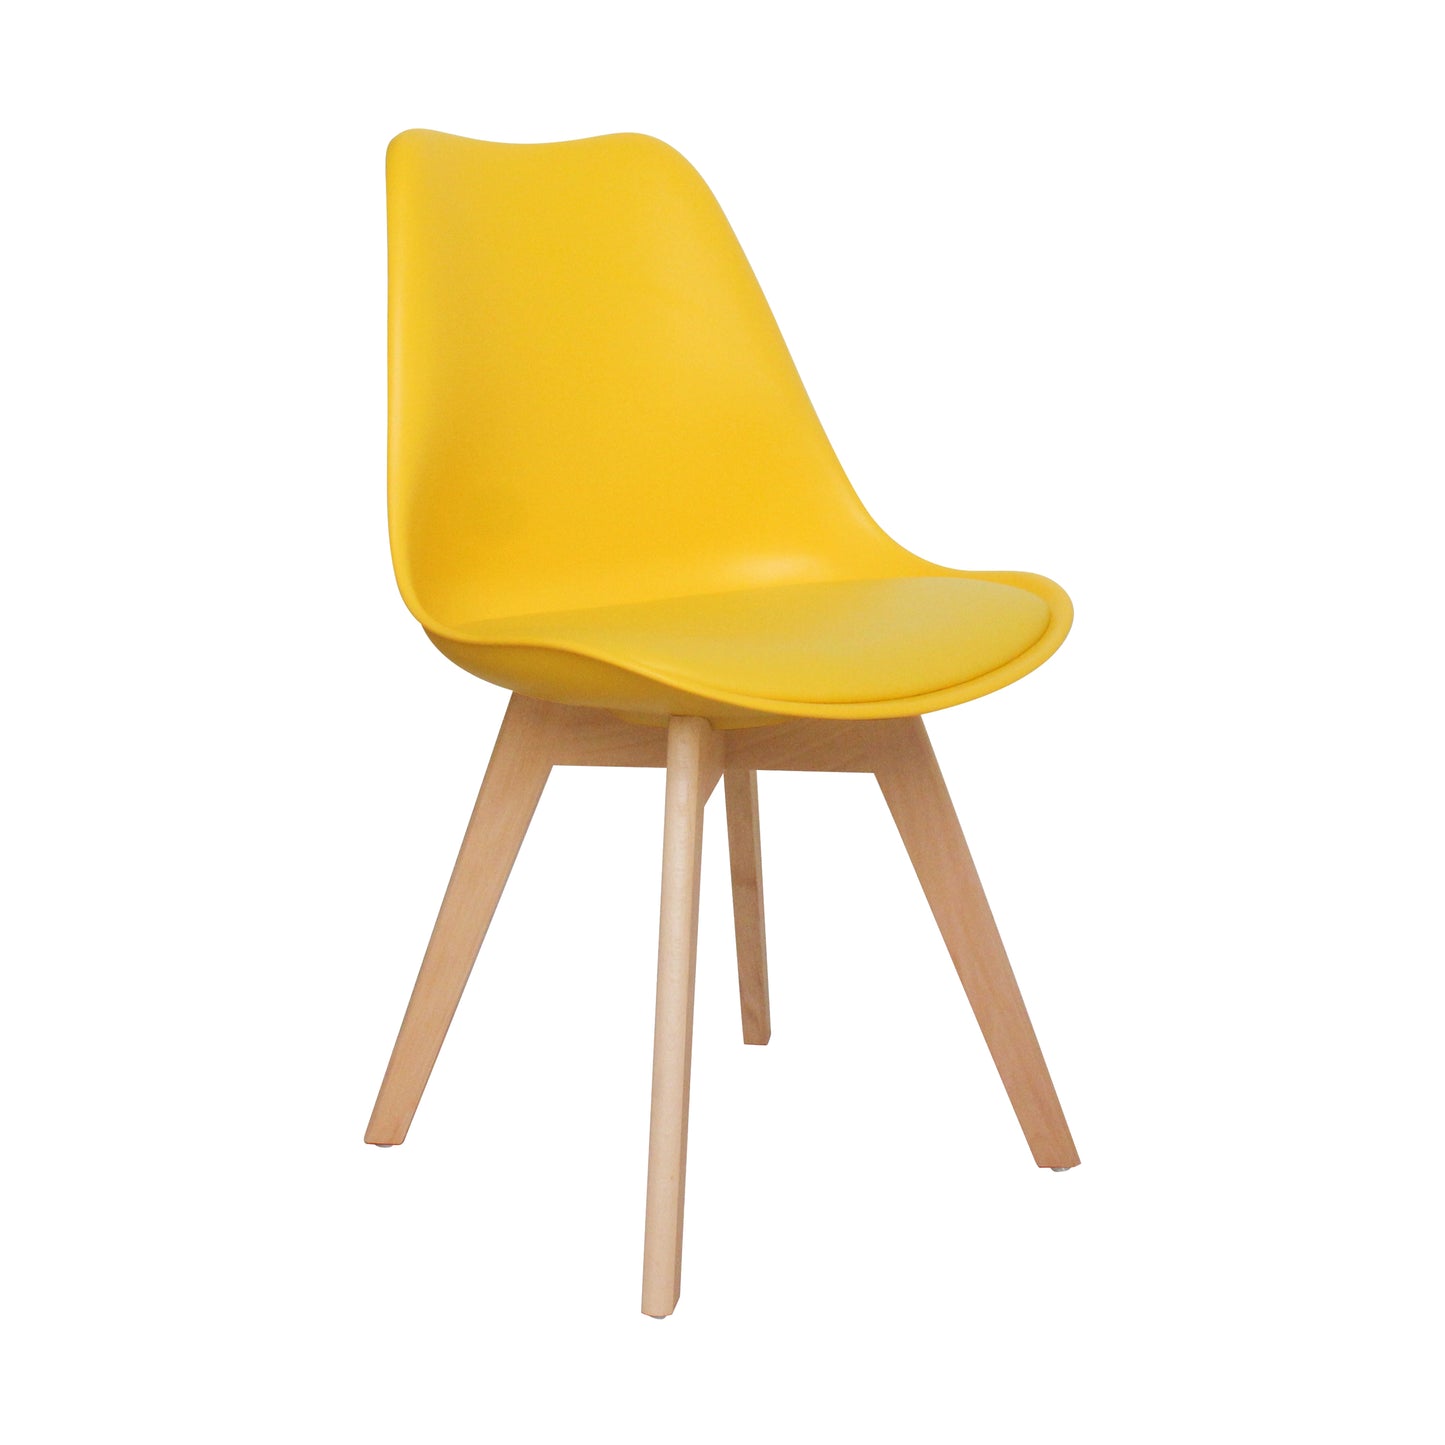 CHOTTO - Ando Dining Chairs - Yellow x 2